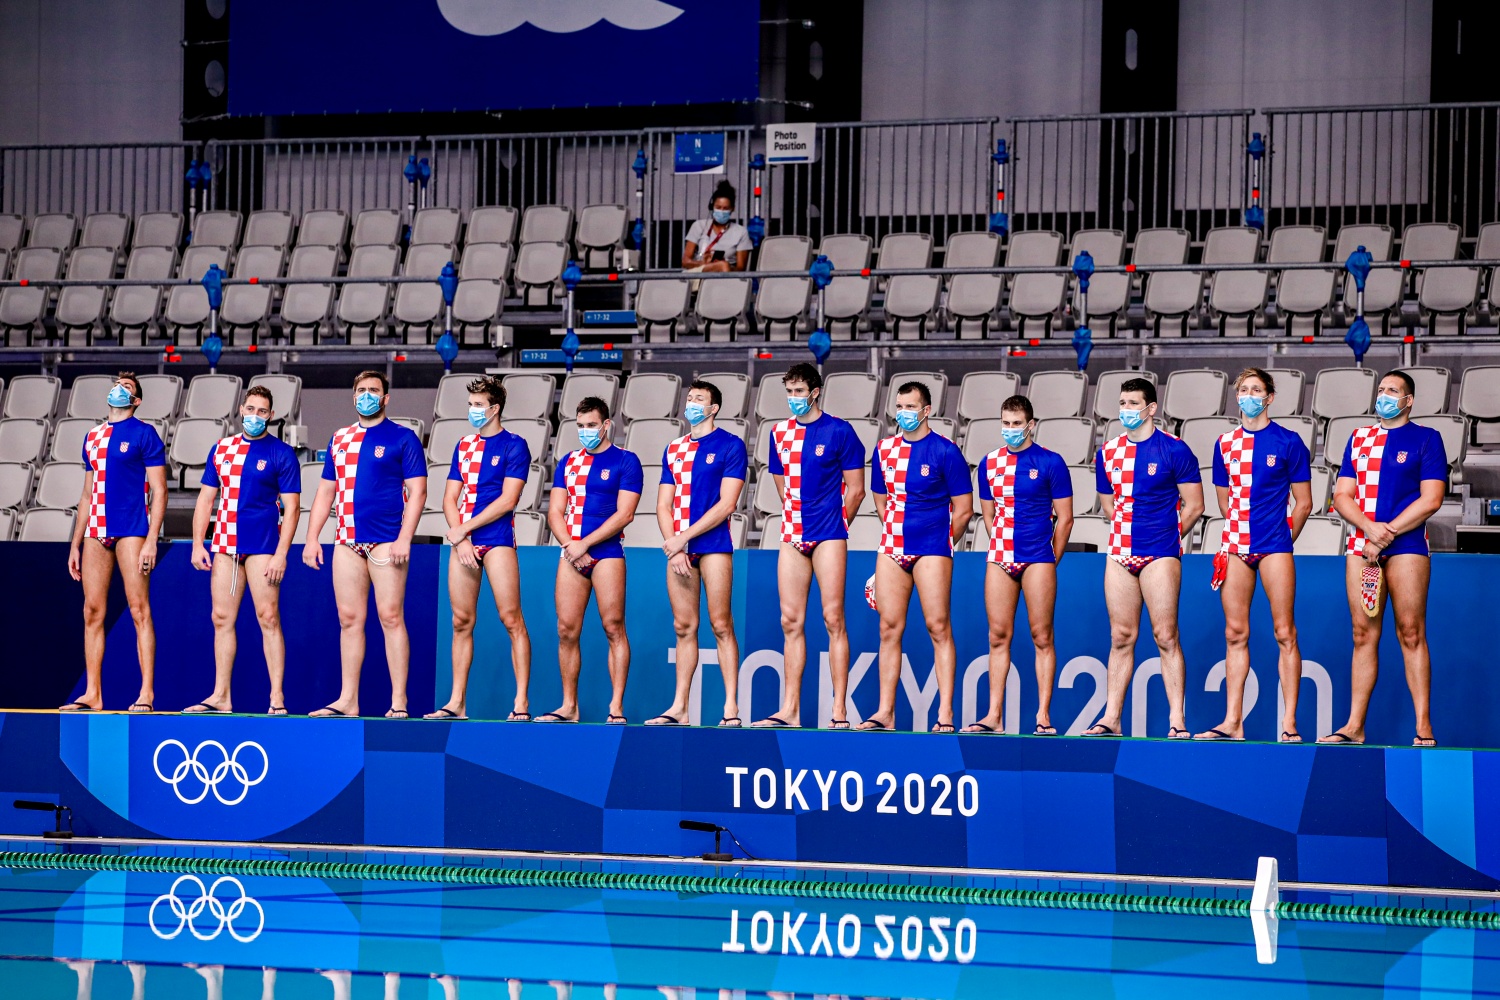 TOKYO, JAPAN - JULY 25: Team Croatia during the Tokyo 2020 Olympic Waterpolo Tournament Men match between Team Croatia and Team Kazakhstan at Tatsumi Waterpolo Centre on July 25, 2021 in Tokyo, Japan (Photo by Marcel ter Bals/Orange Pictures)